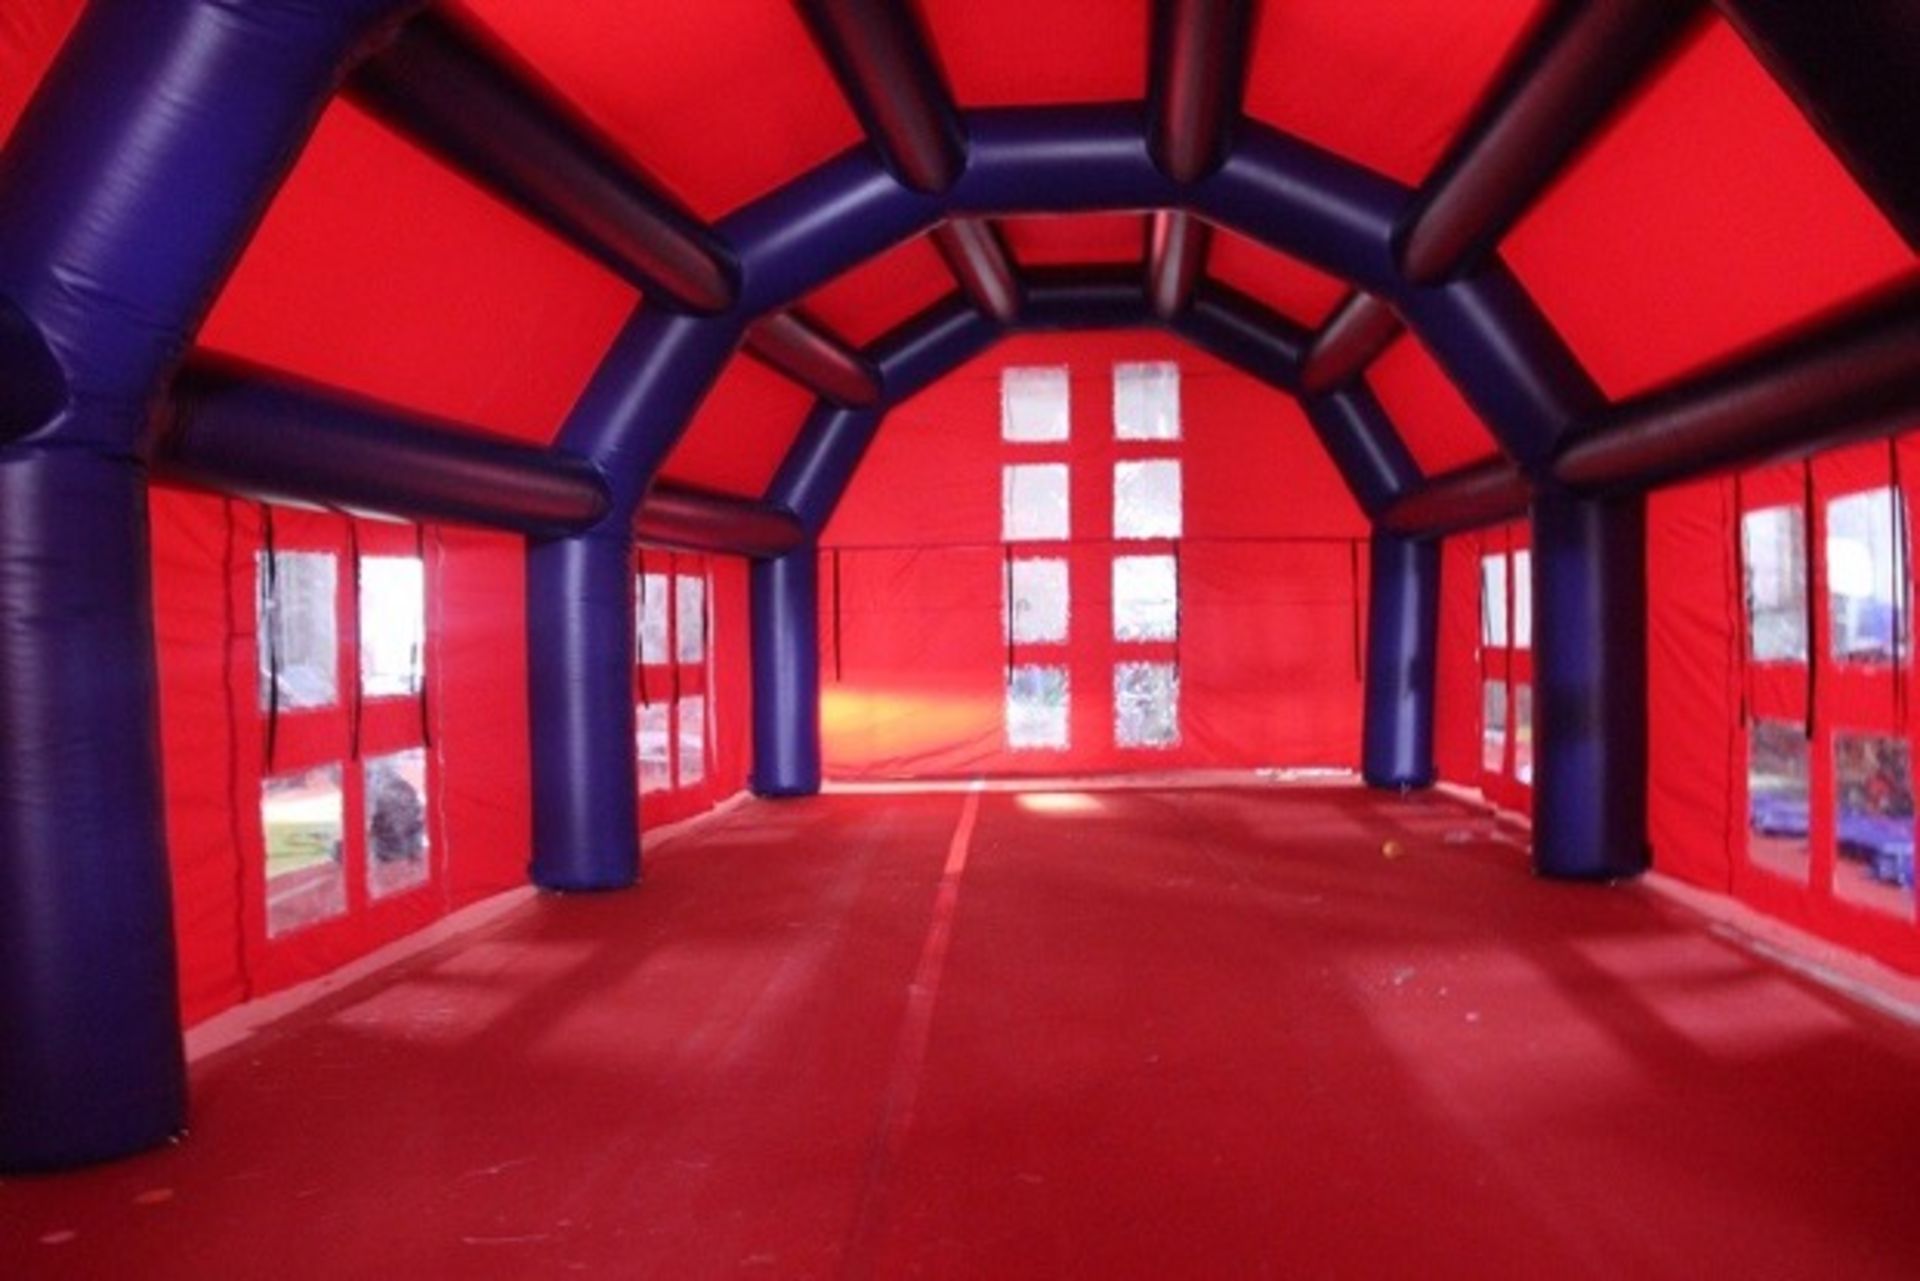 BRAND NEW GIANT INFLATABLE MARQUEE, 15m x 6m, 4.5m TALL, FOR EVENTS - WEDDINGS, BIRTHDAYS - Image 7 of 10